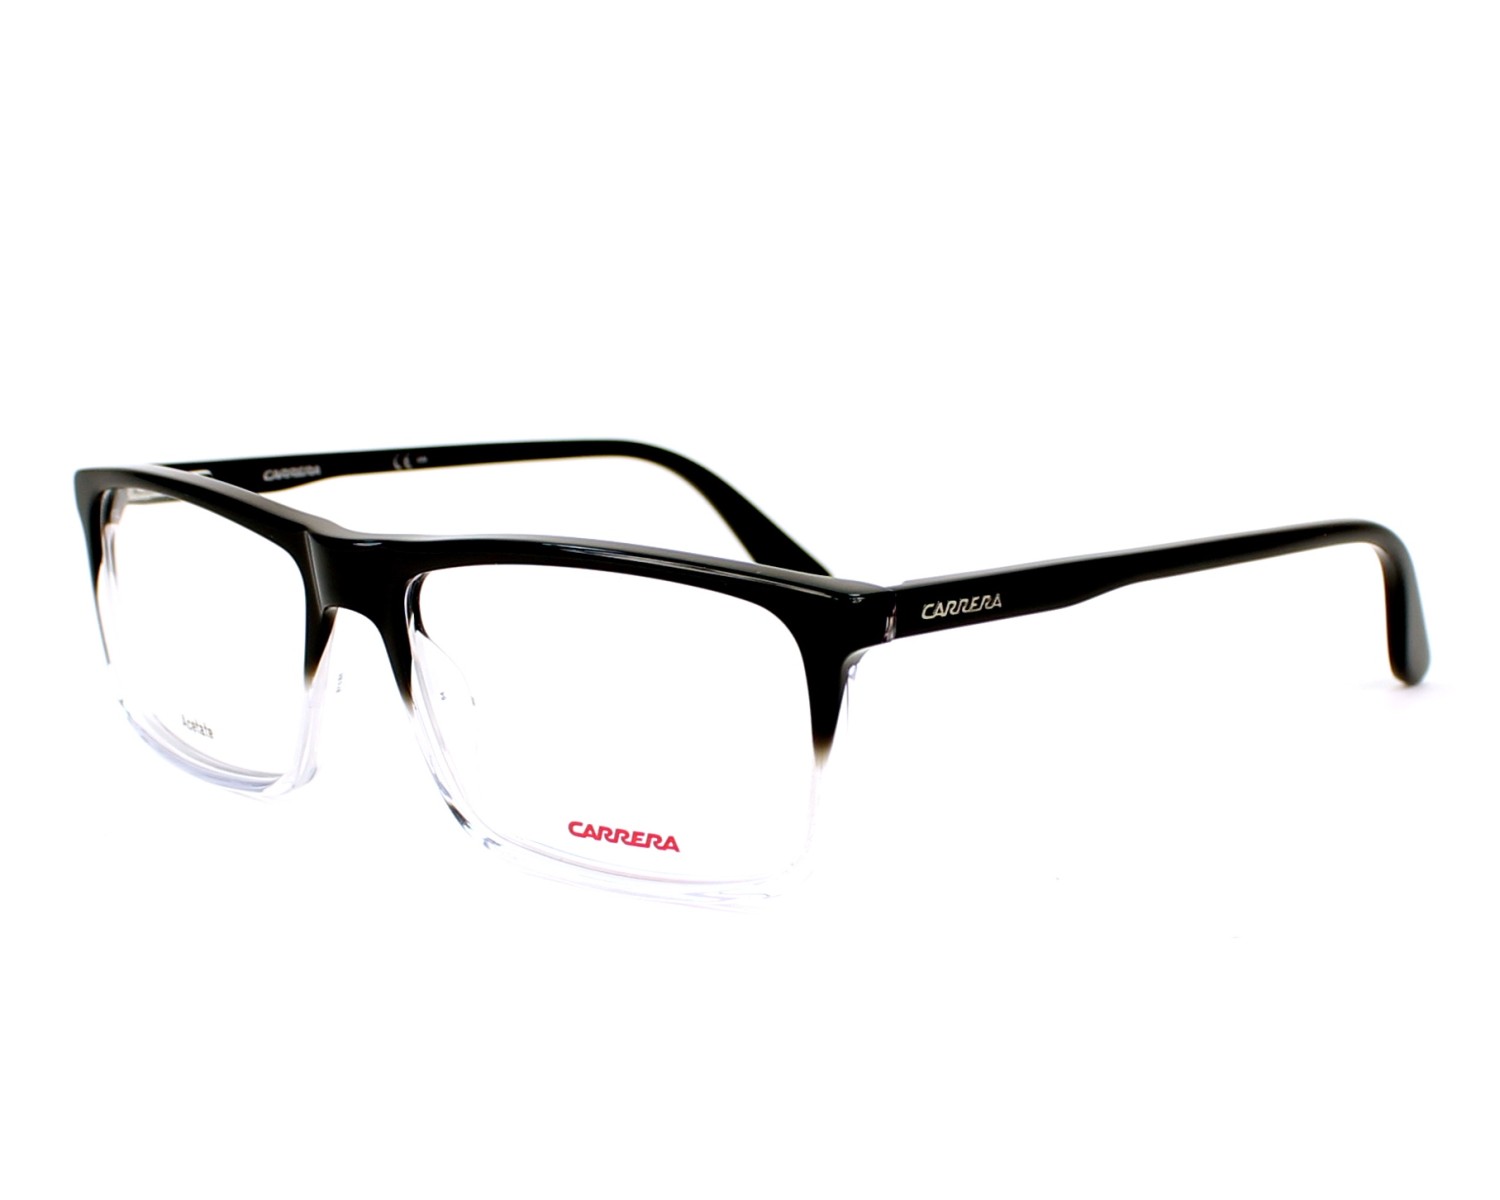 We've saved the best eyeglass styles for you this holiday season on Carrera ...